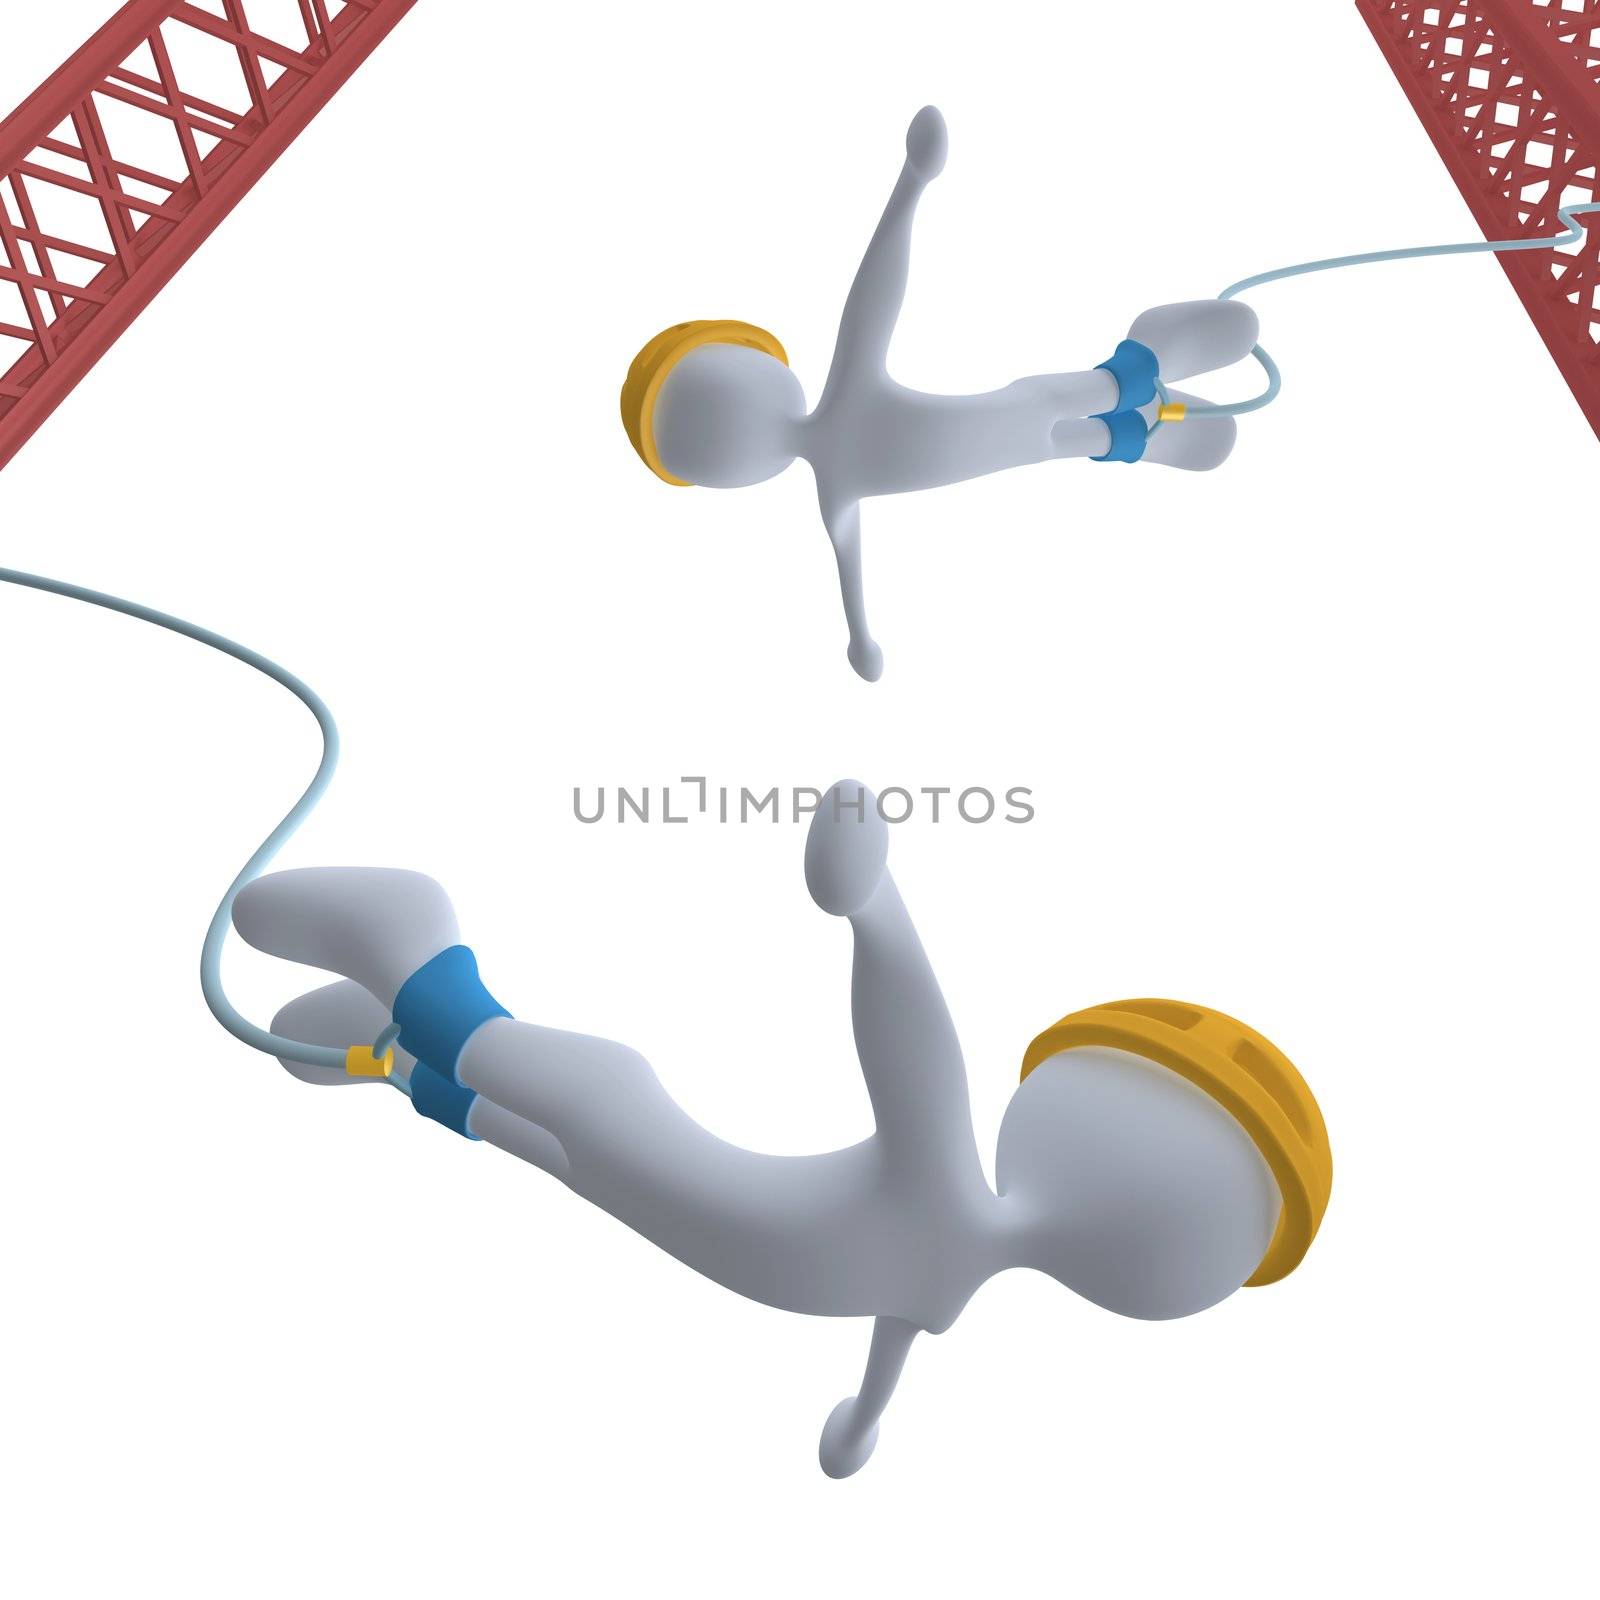 Computer generated image - Bungee Jumping.